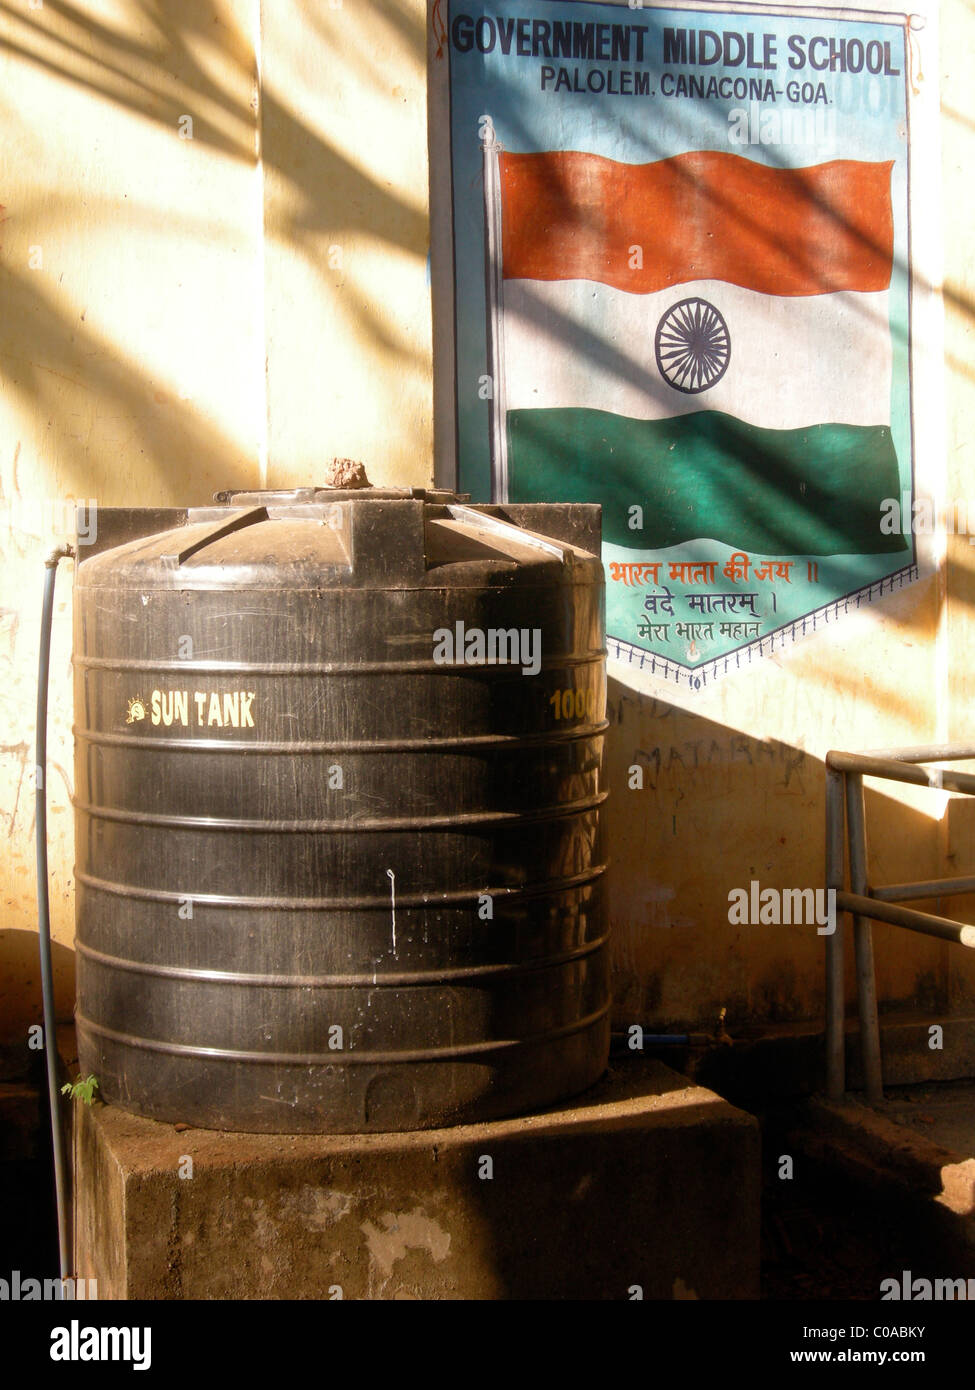 INDIA. WATER TANK OUTSIDE A MIDDLE SECUNDARY SCHOOL IN GOA Stock Photo